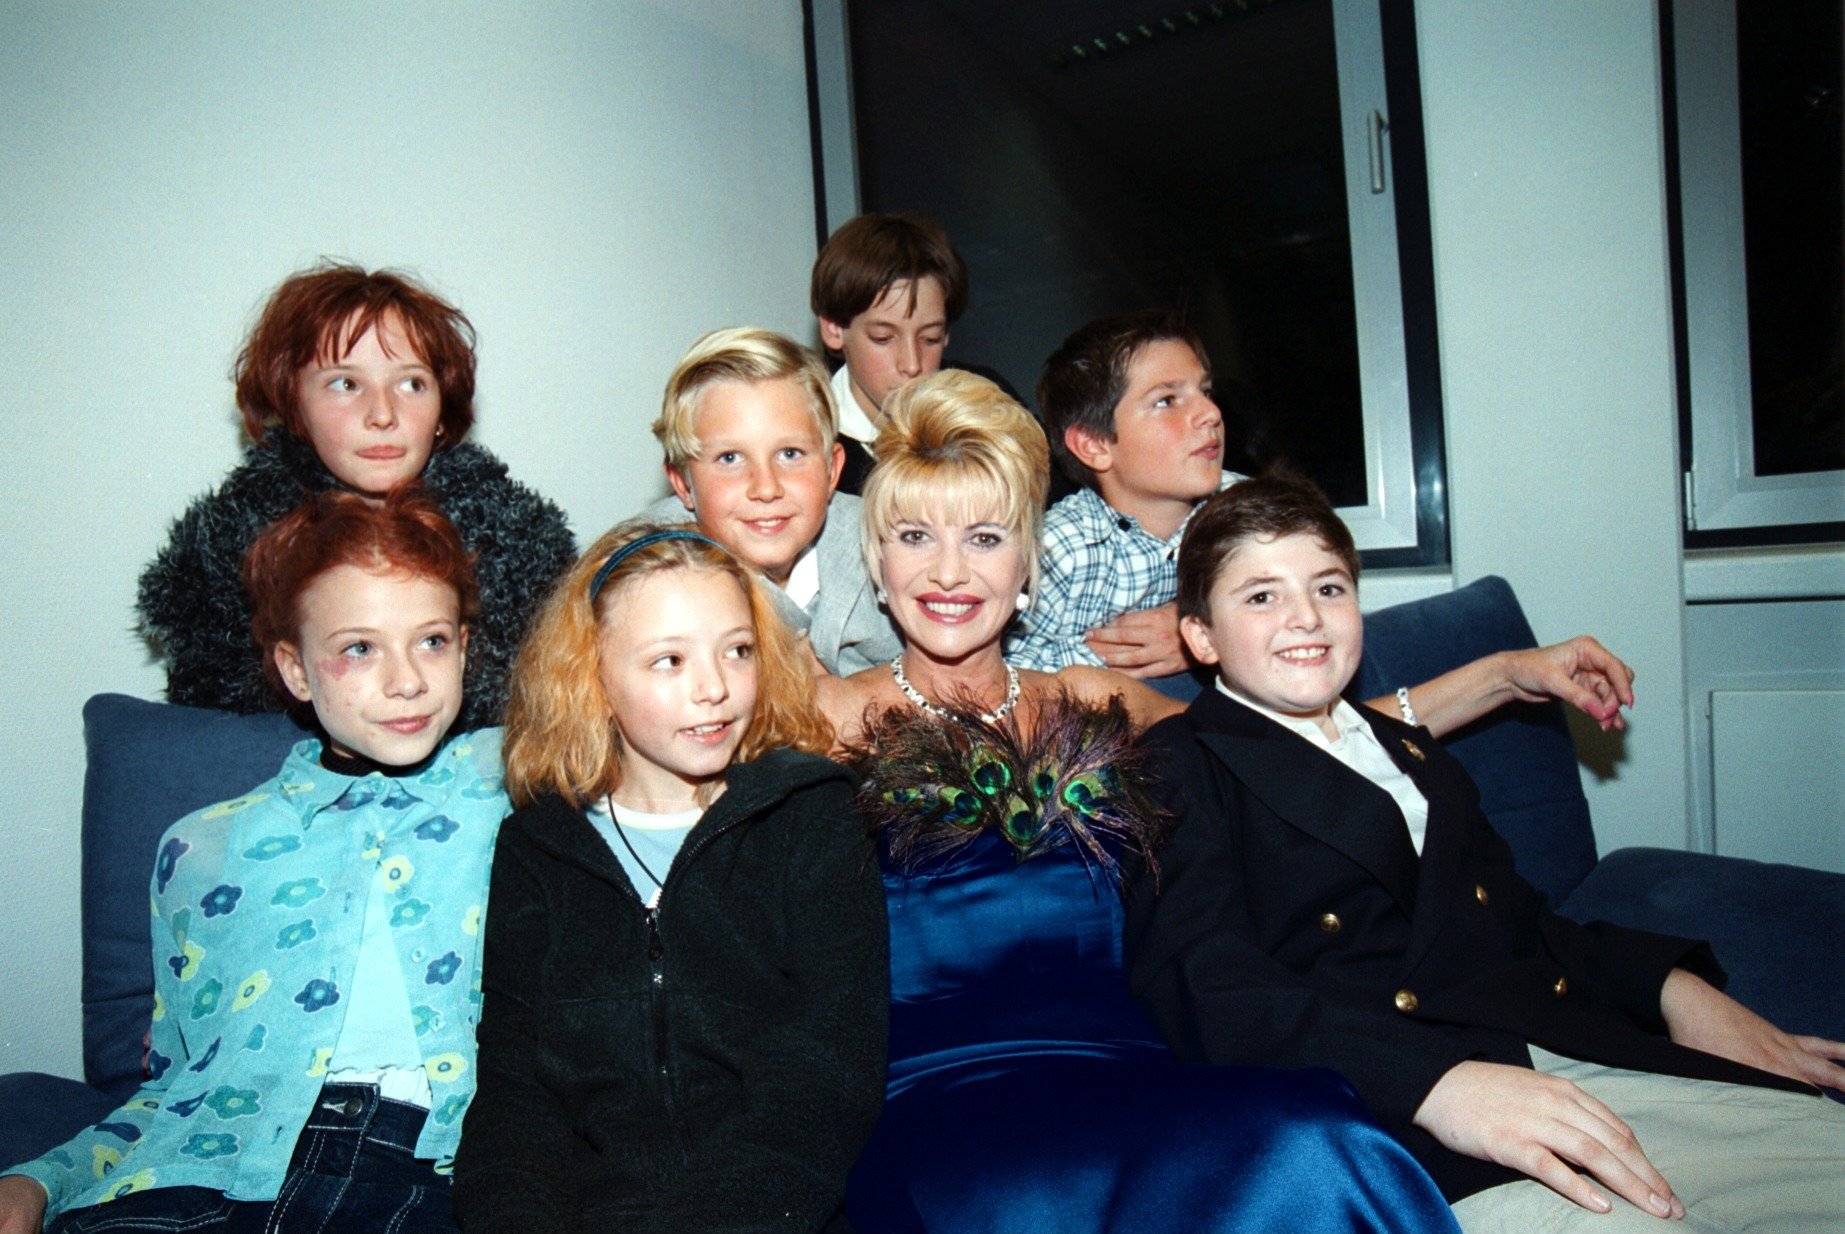 Ivana Trump surrounded by children. | Source: Getty Images